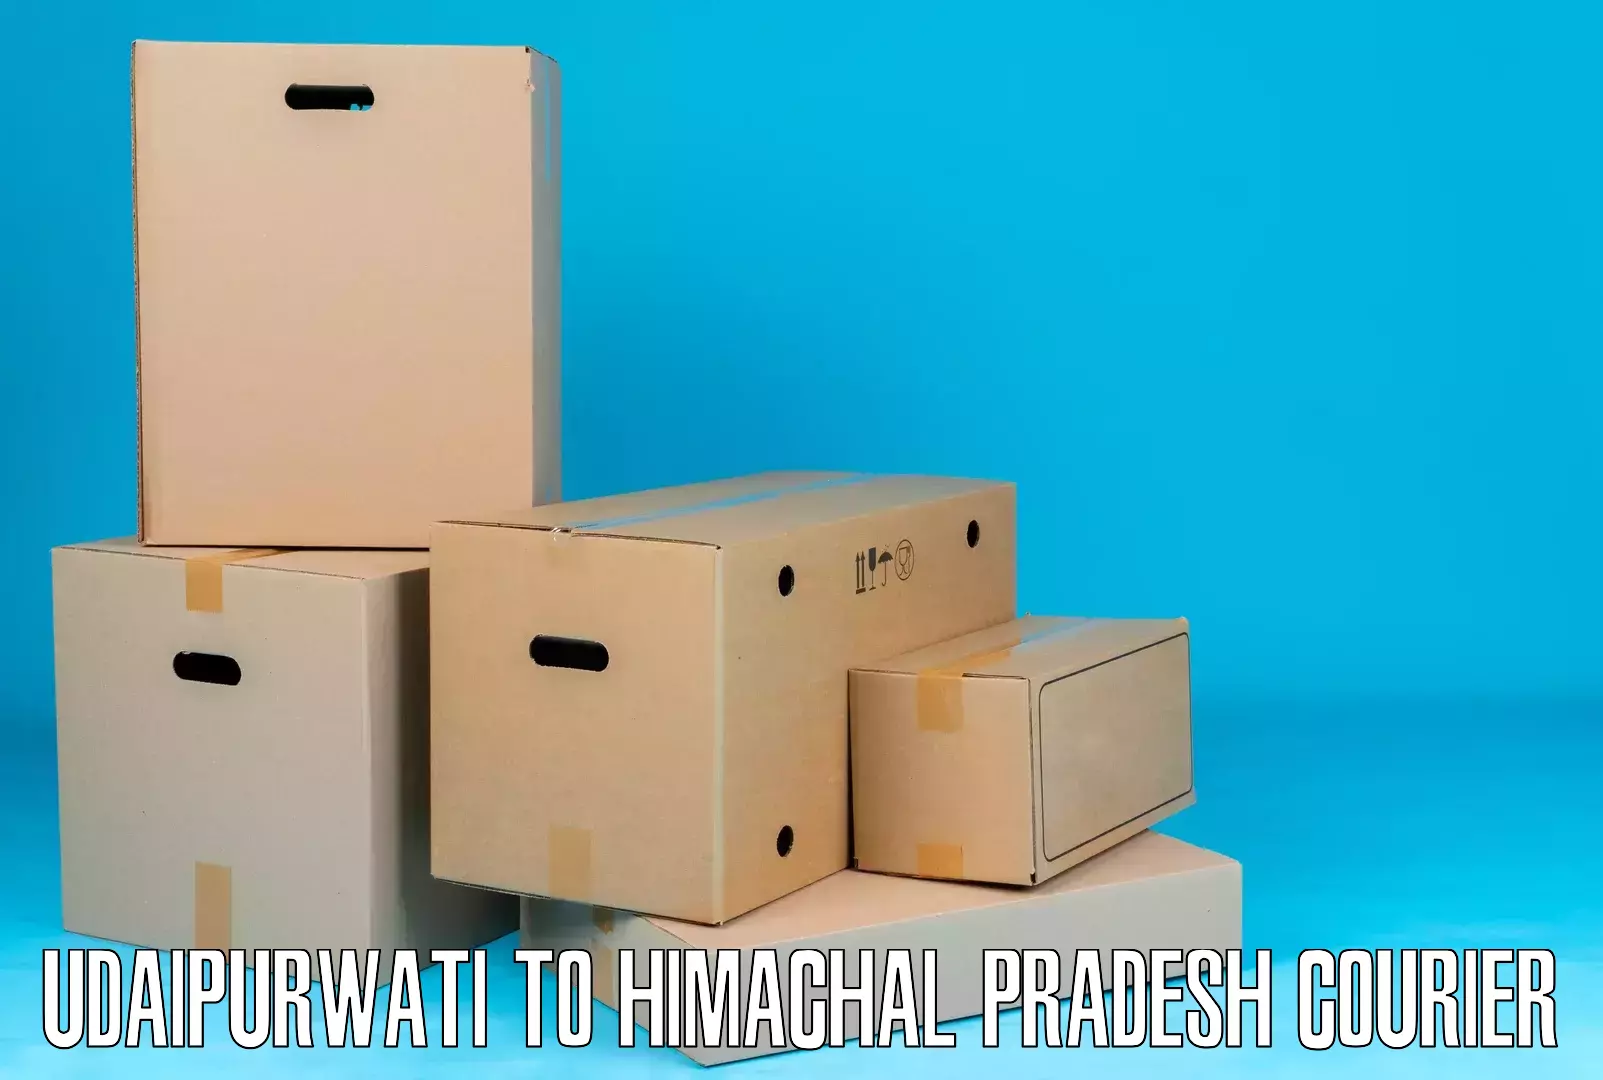 Nationwide shipping services Udaipurwati to Una